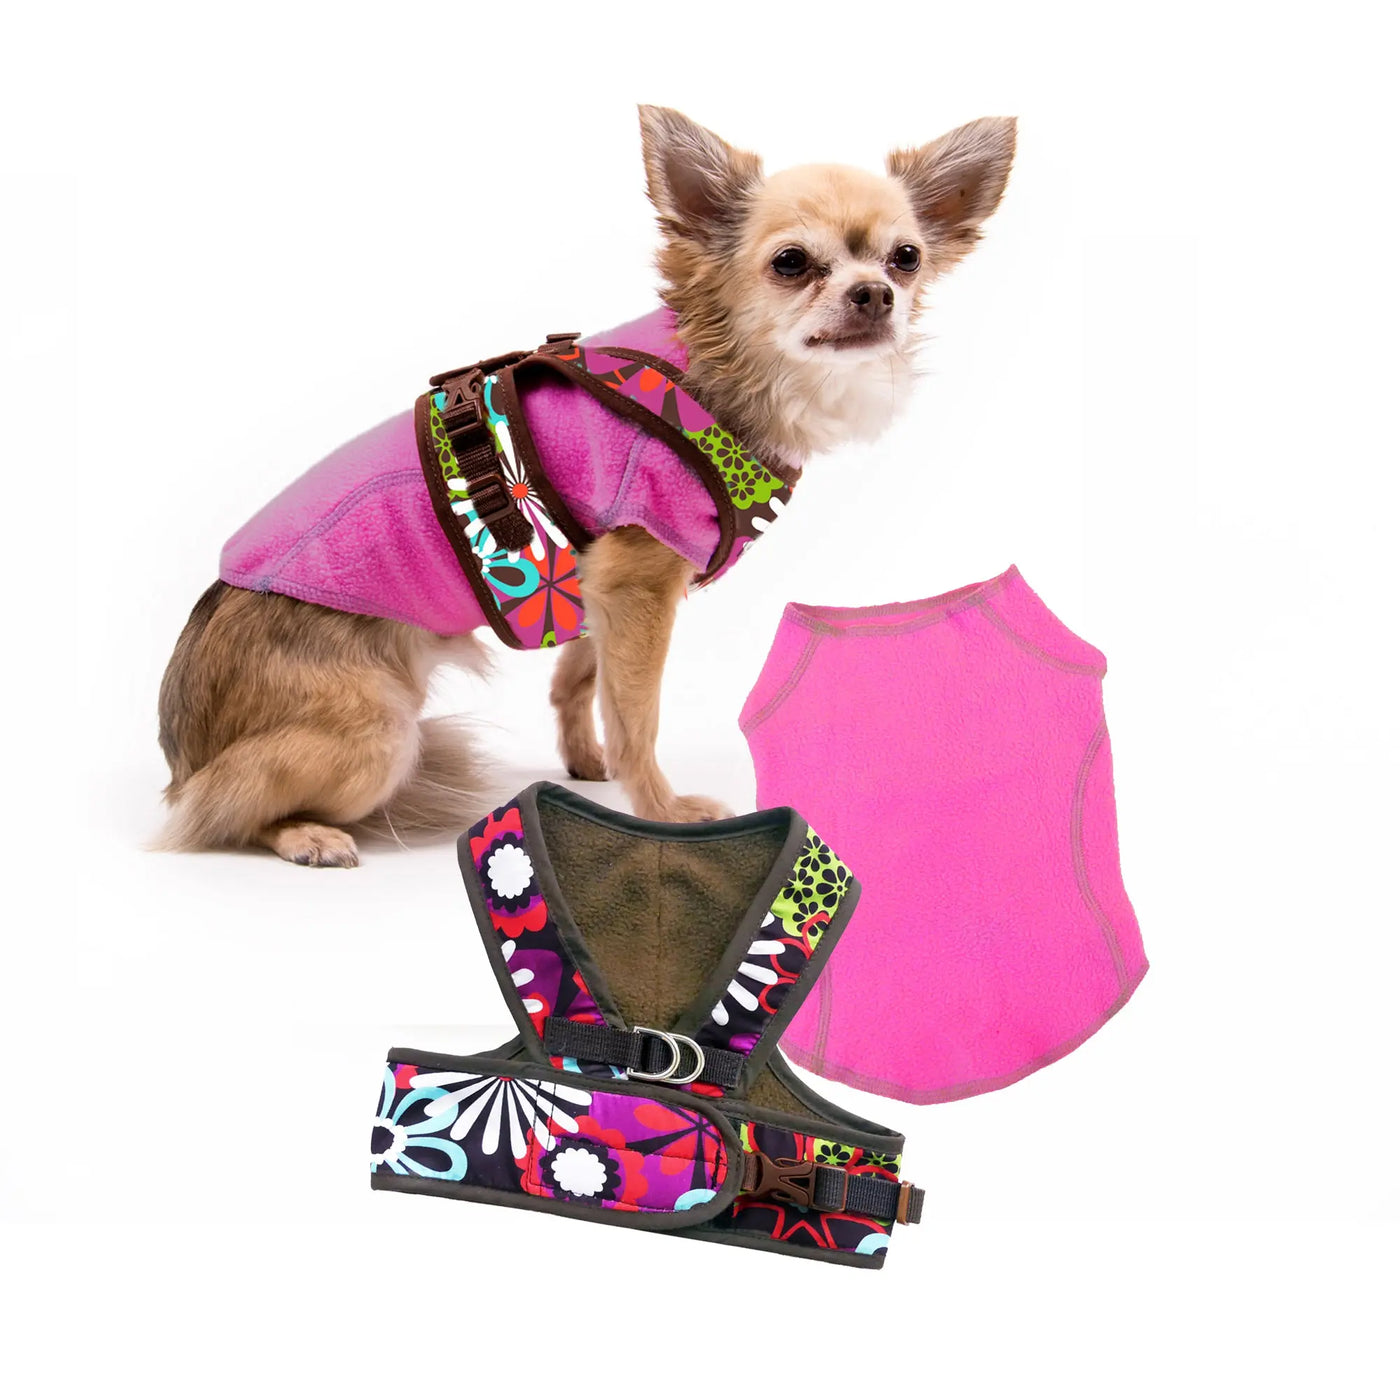 floral harness and hot pink sweater on a dog